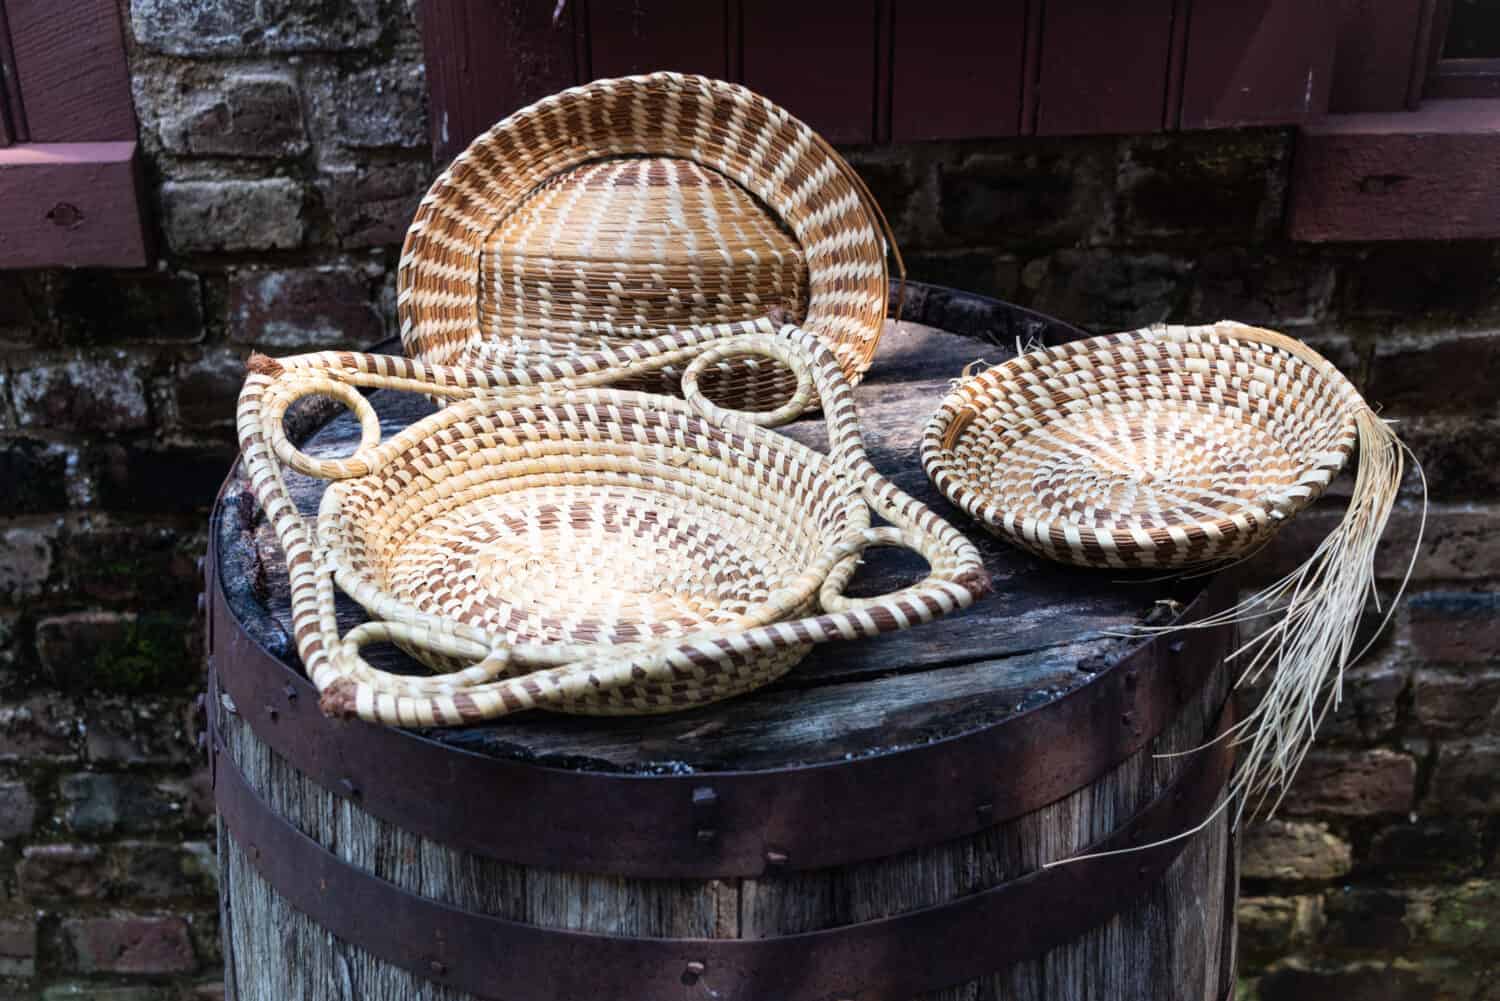 A photo of hand-made sweetgrass baskets made in the Gullah-Geechee style of Lowcountry, South Carolina.